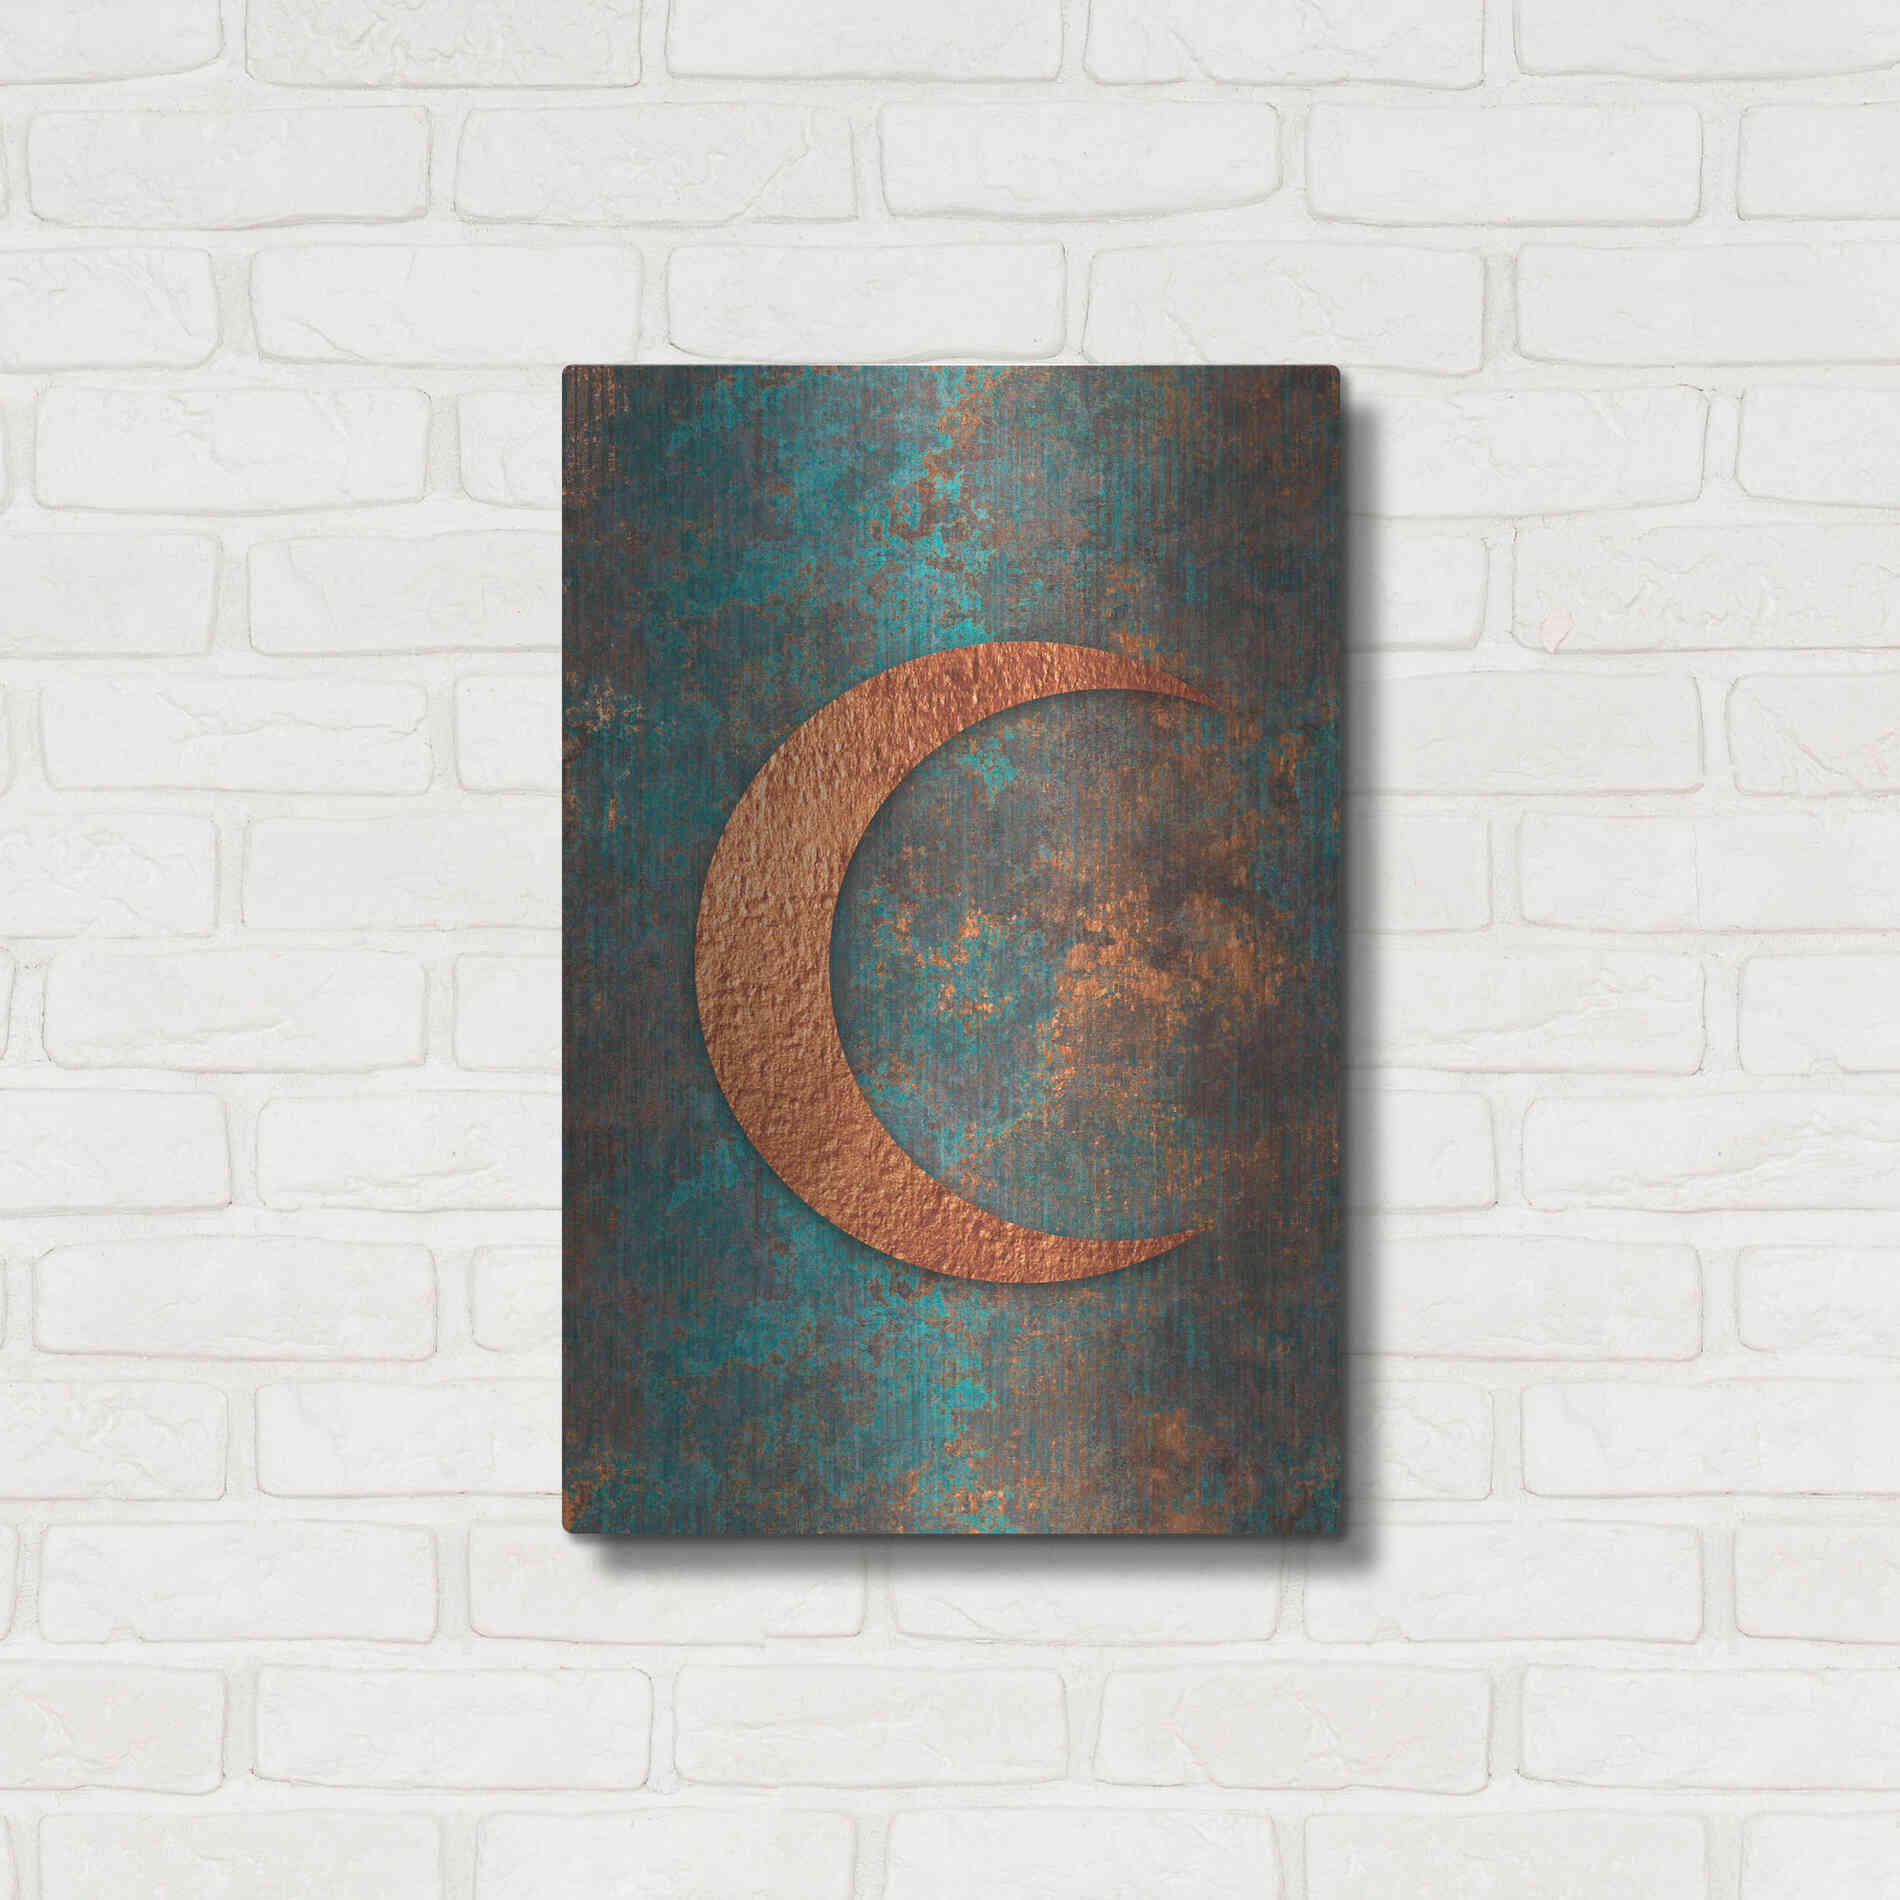 Luxe Metal Art 'Moon Symbiosis Of Rust And Copper' by Andrea Haase, Metal Wall At,16x24